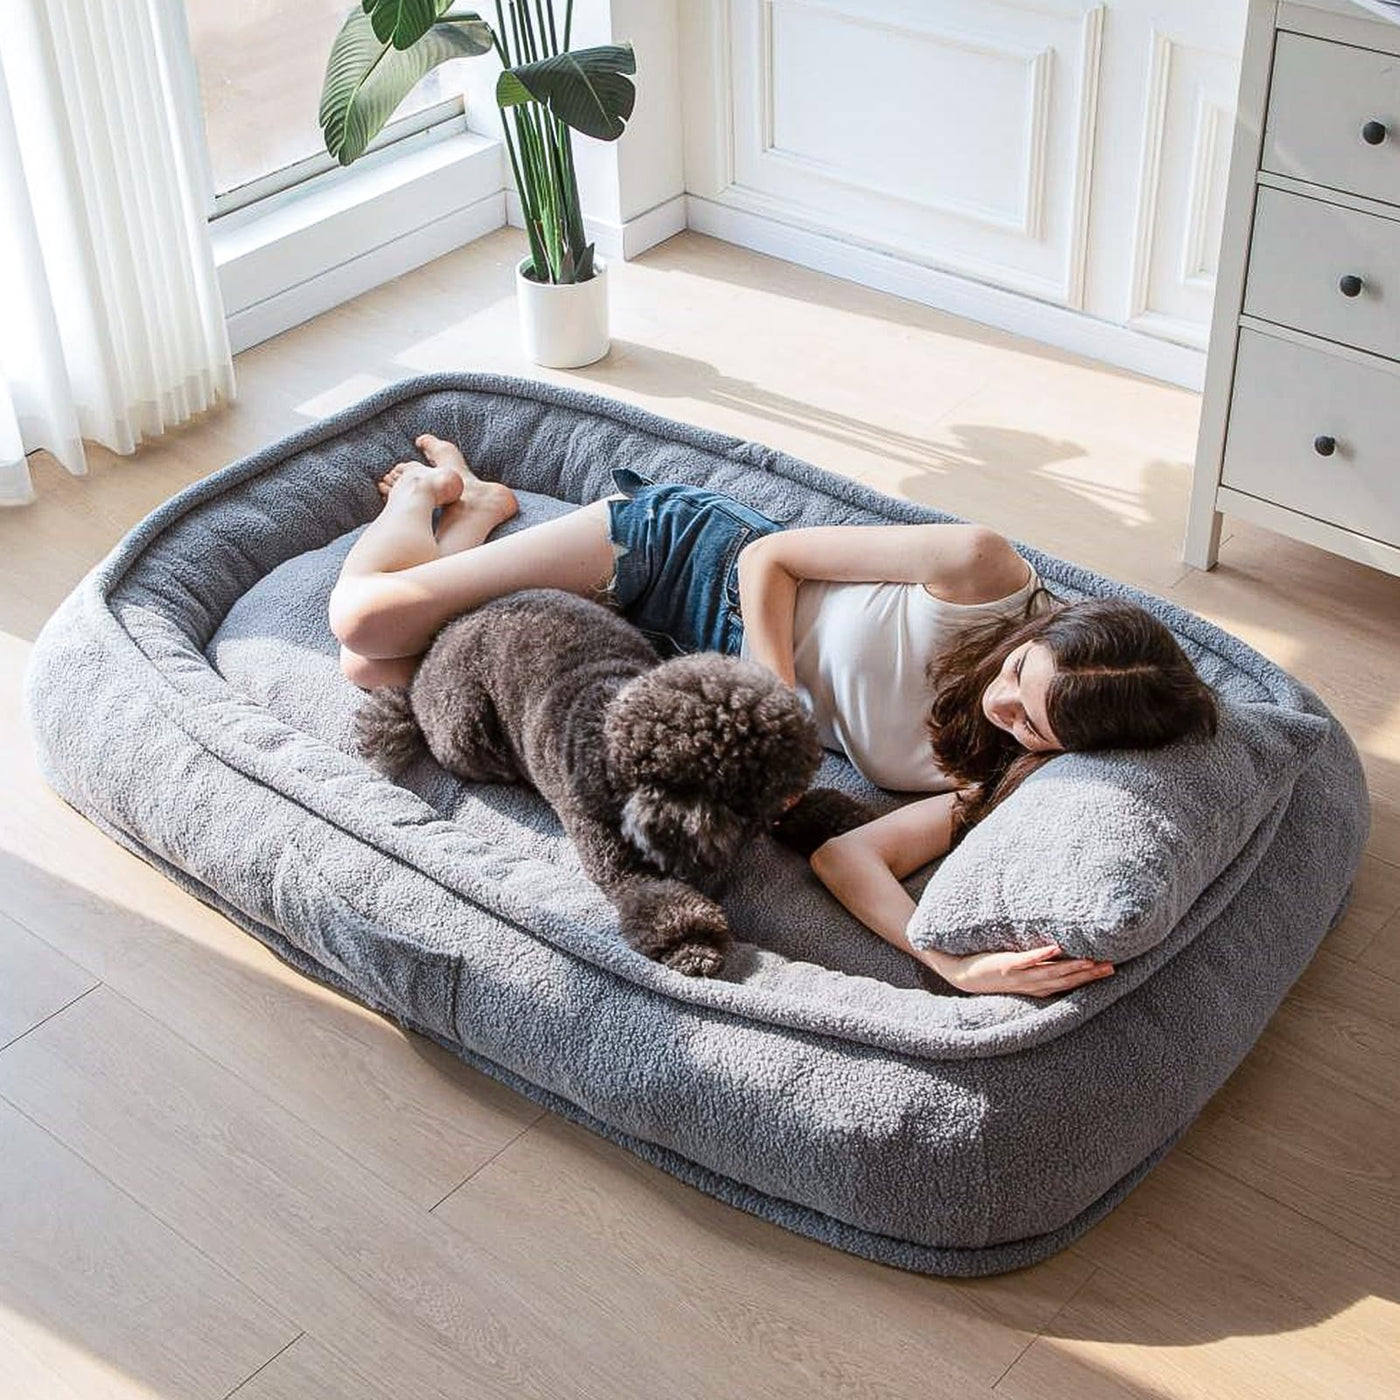 MAXYOYO Human Dog Bed with Pillow, Giant Bean Bag Bed for Adults, Grey, 72.8"x45.3"x12"